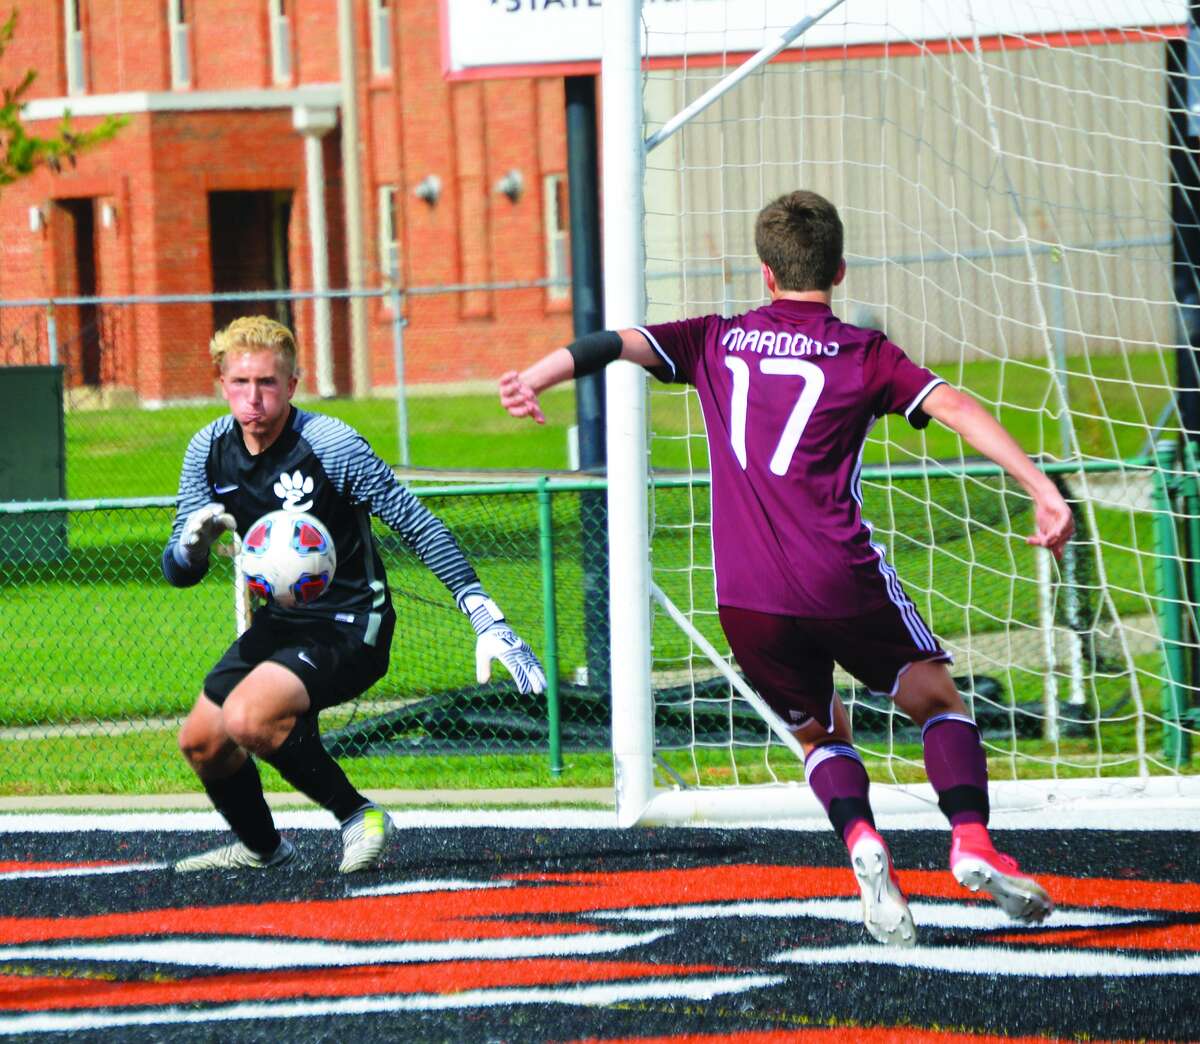 Edwardsville keeper Michael Hoelting, left, chases down a loose ball before Belleville West’s Brayden Easton can get to it in the second half.